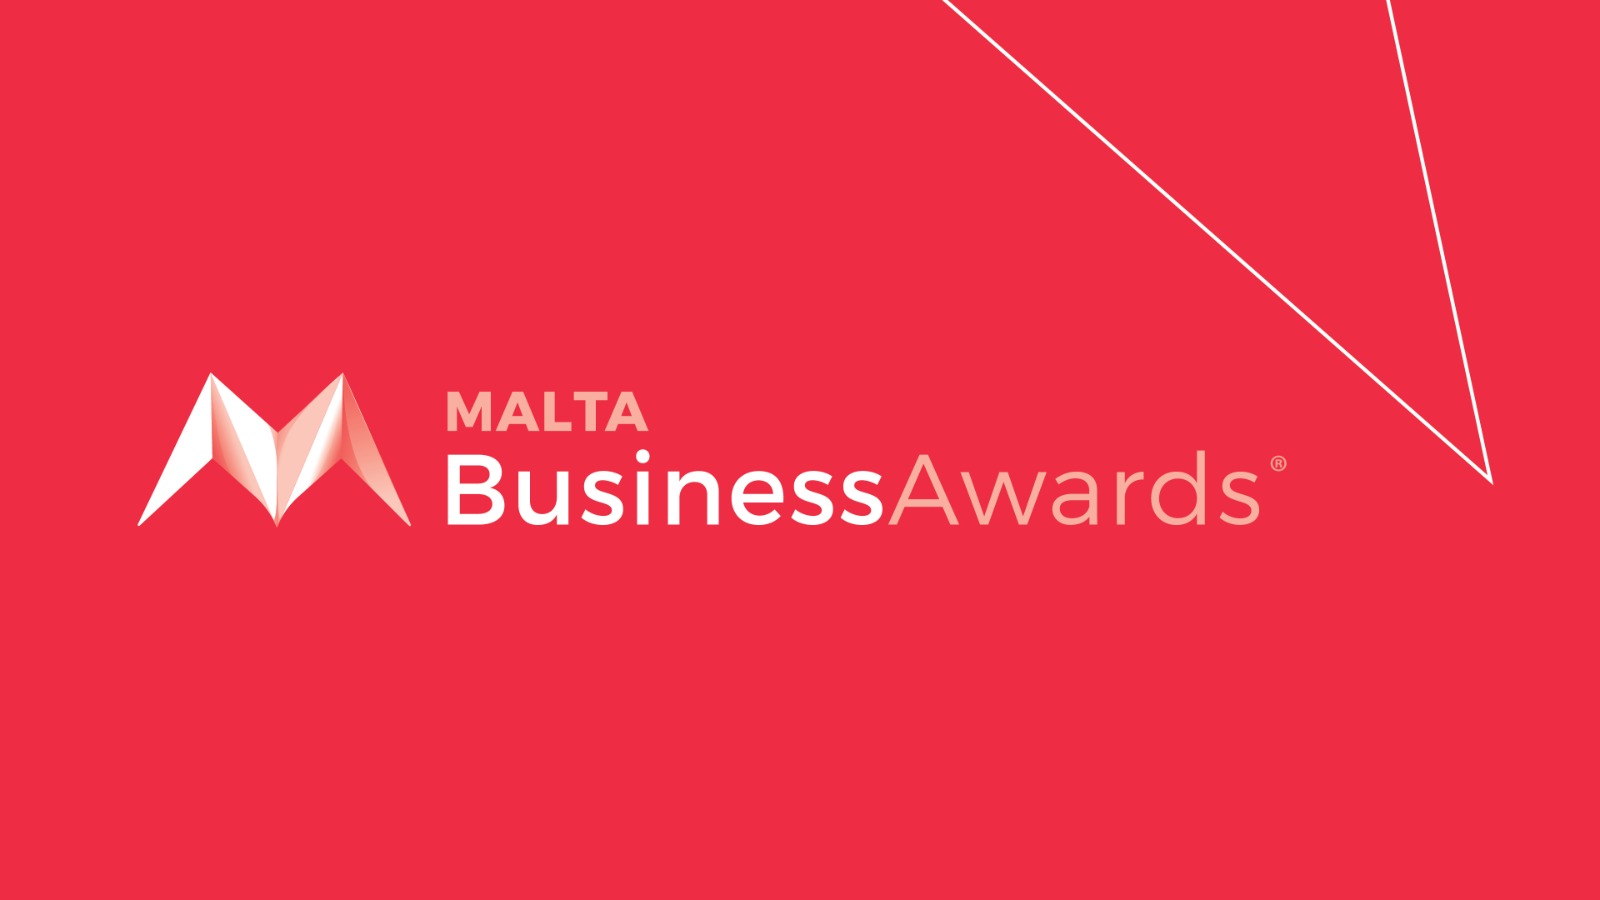 The first edition of the Malta Business Awards announced